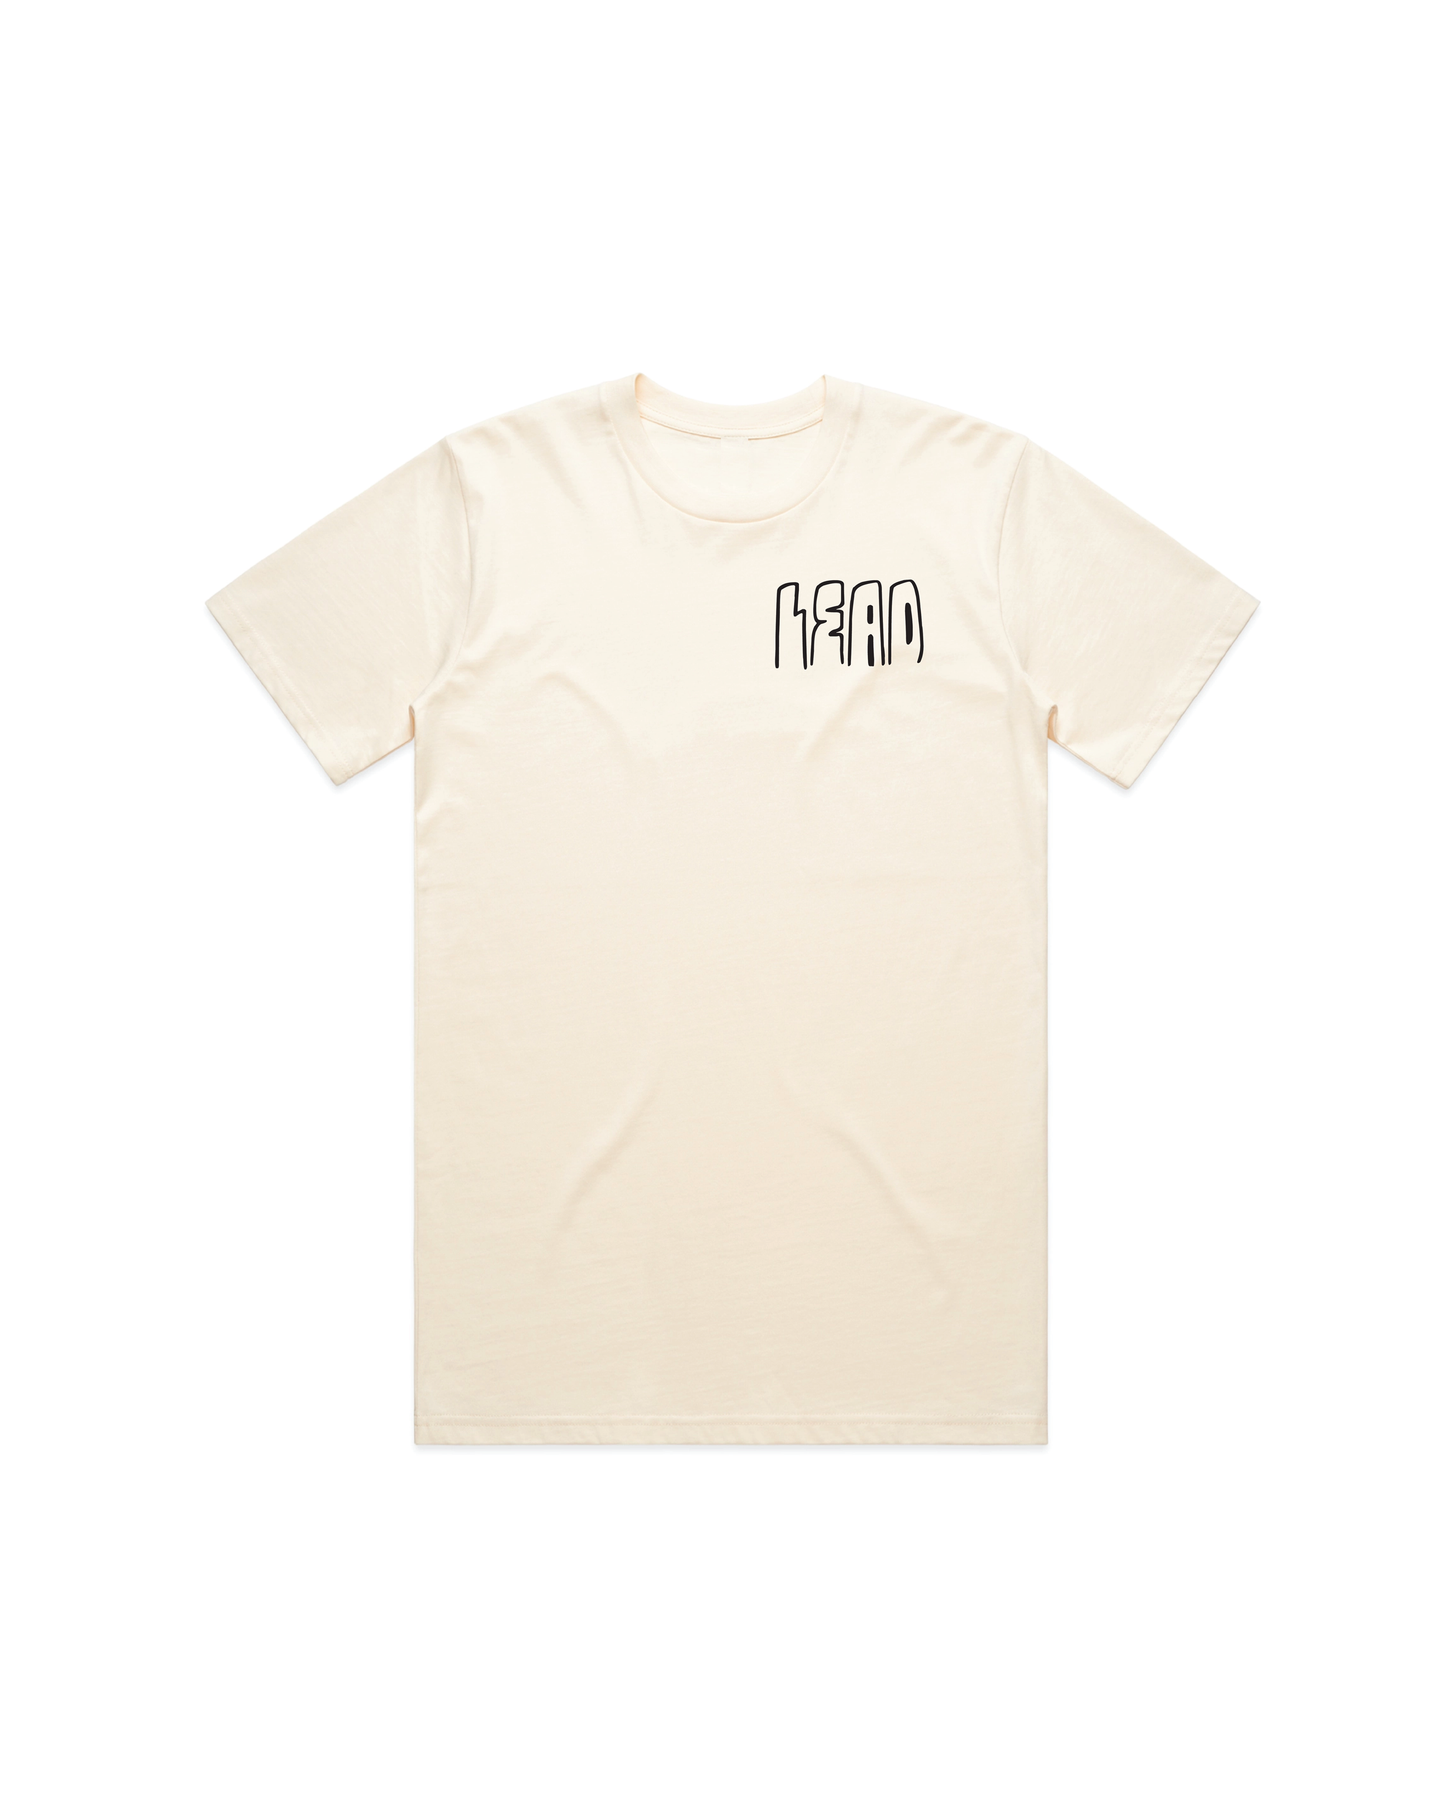 LEAD BULLET OFF WHITE TEE